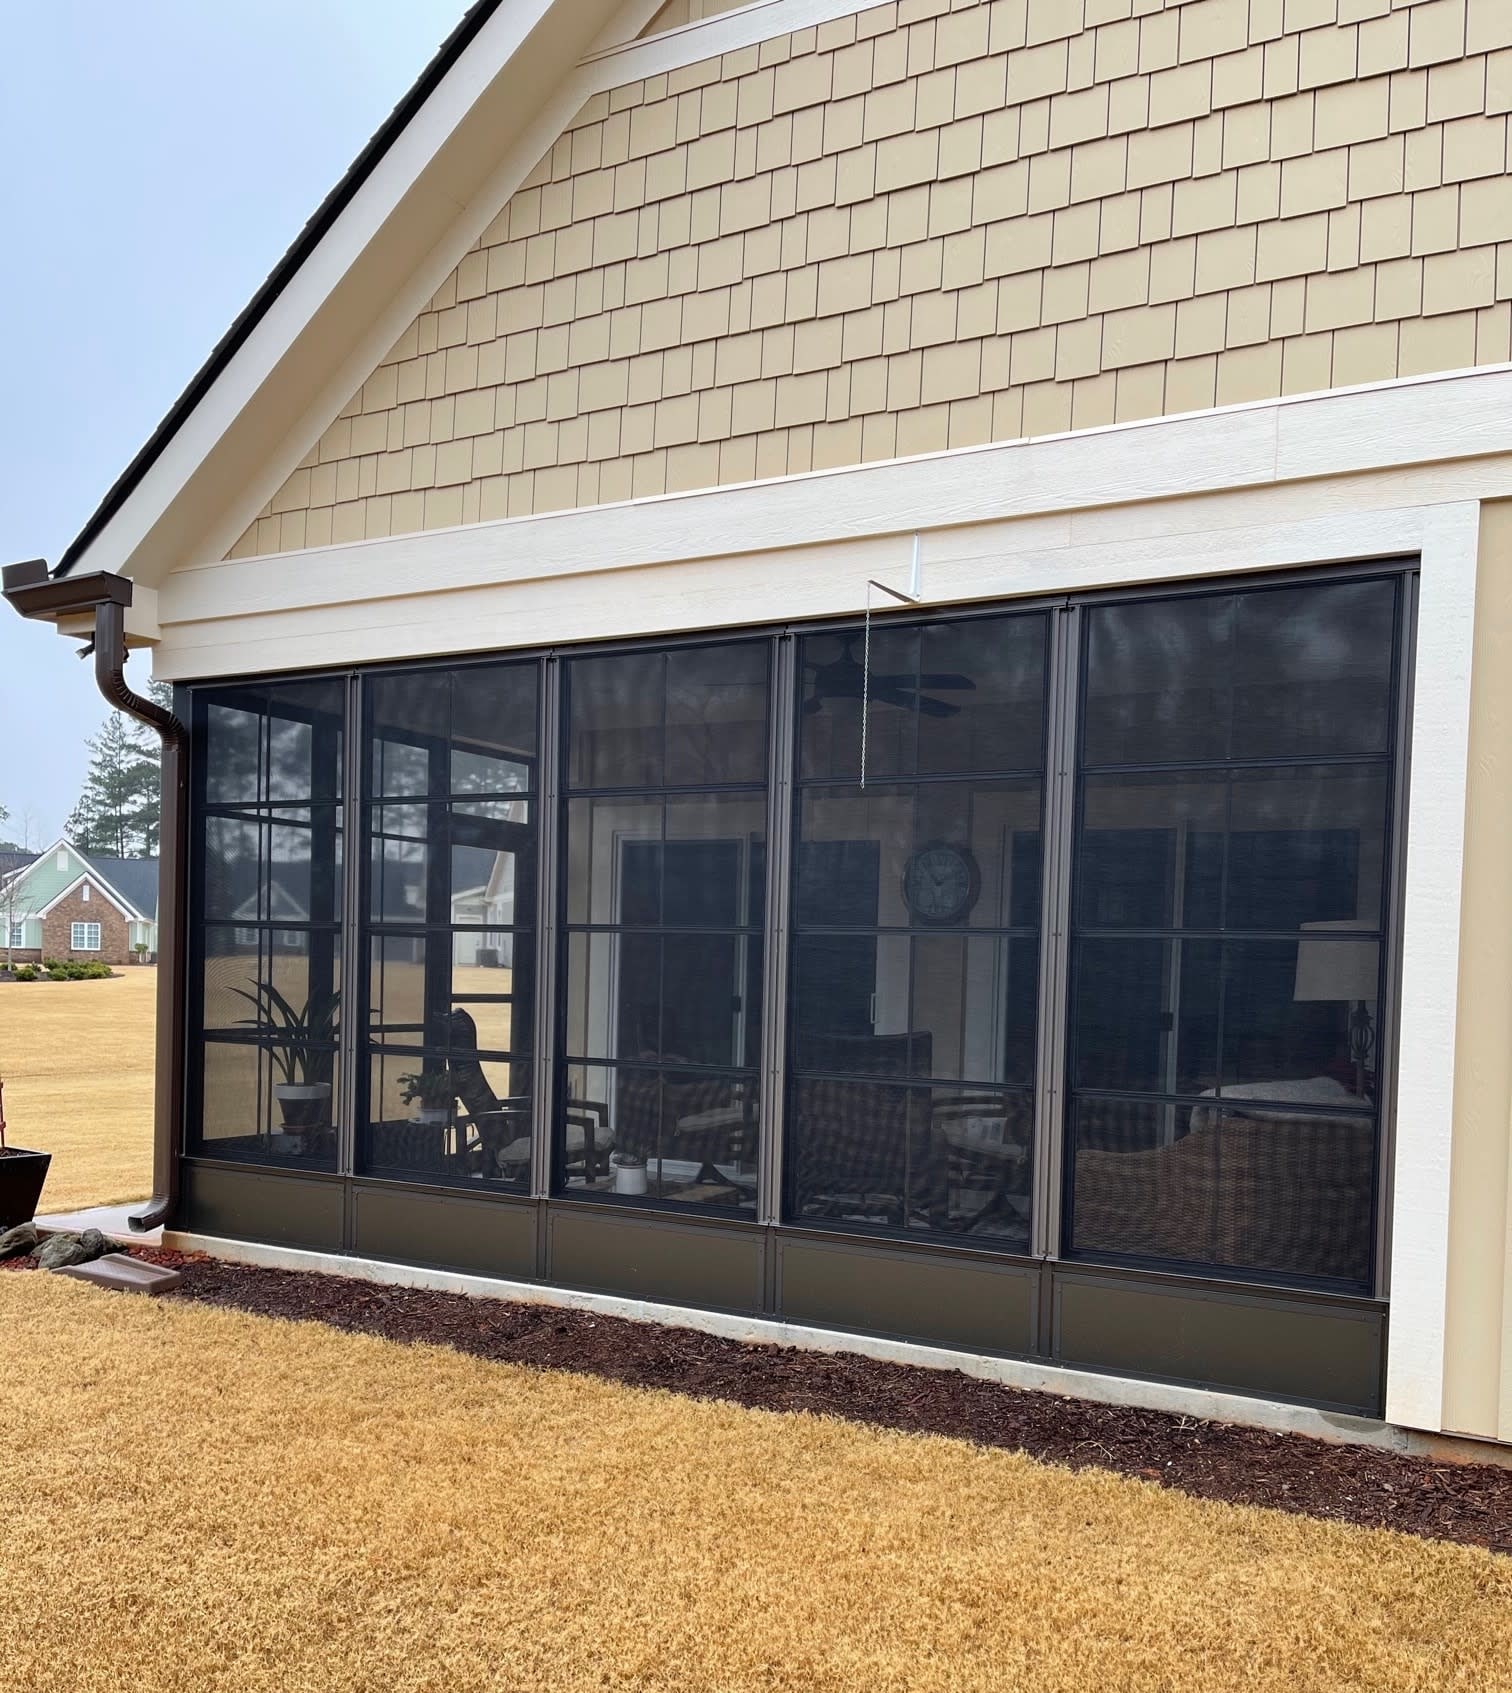 Eze-Breeze Porch Enclosure Panels block pollen, rain, and wind. Panels installed by Palmetto Outdoor Spaces